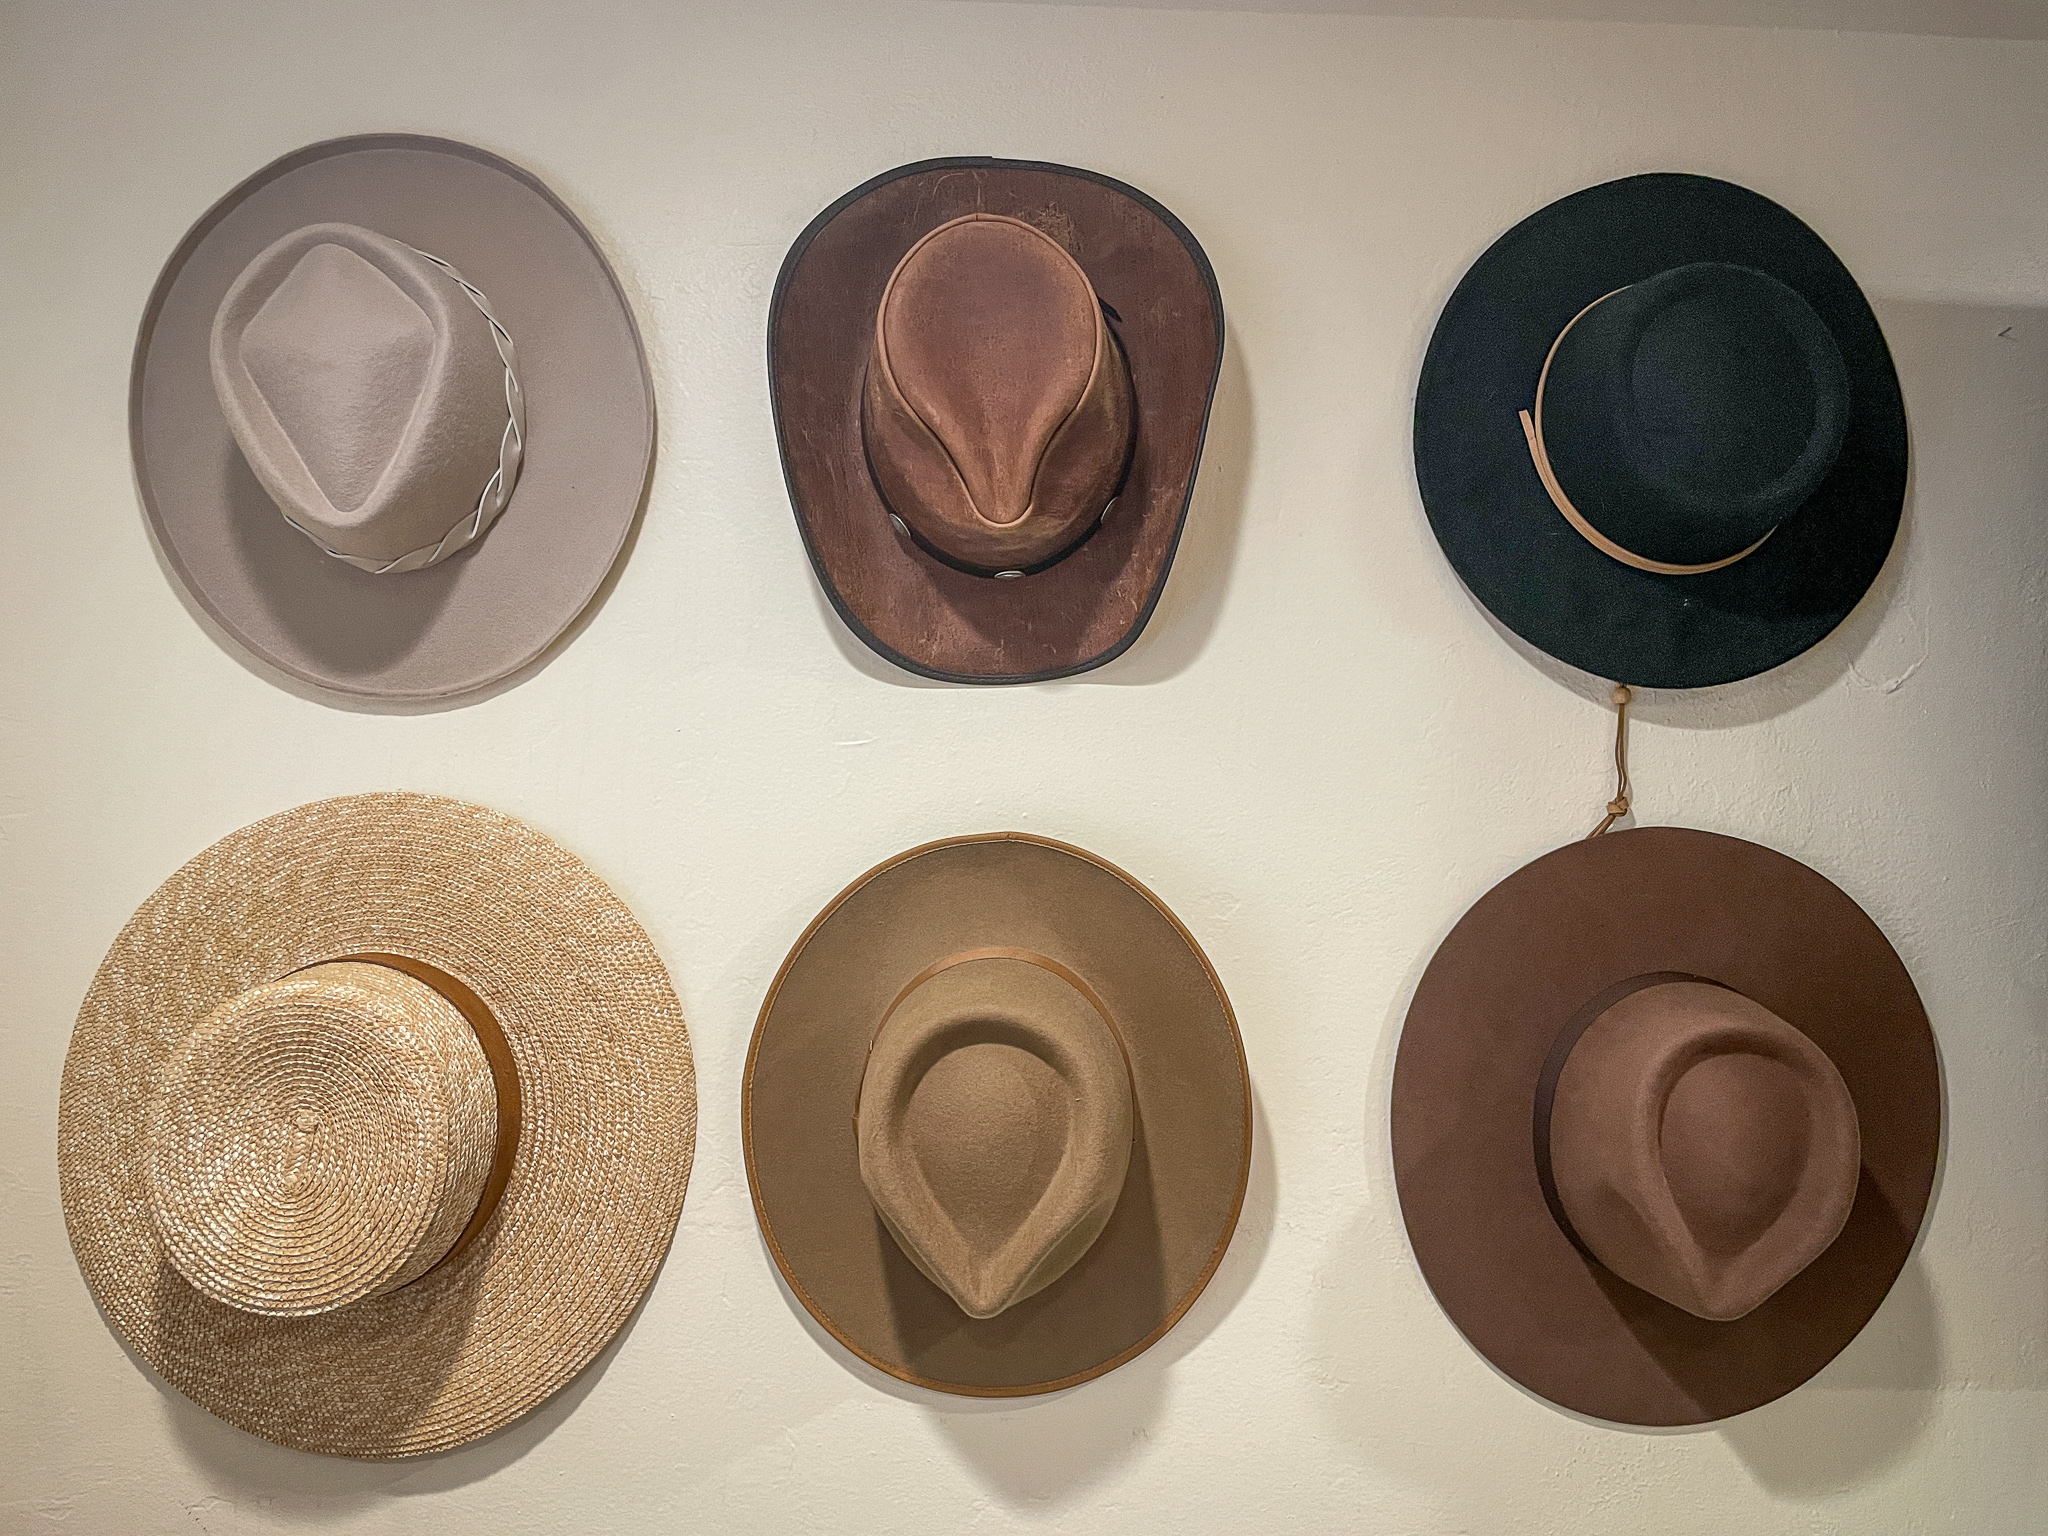 How to Make DIY Hat Wall Tutorial